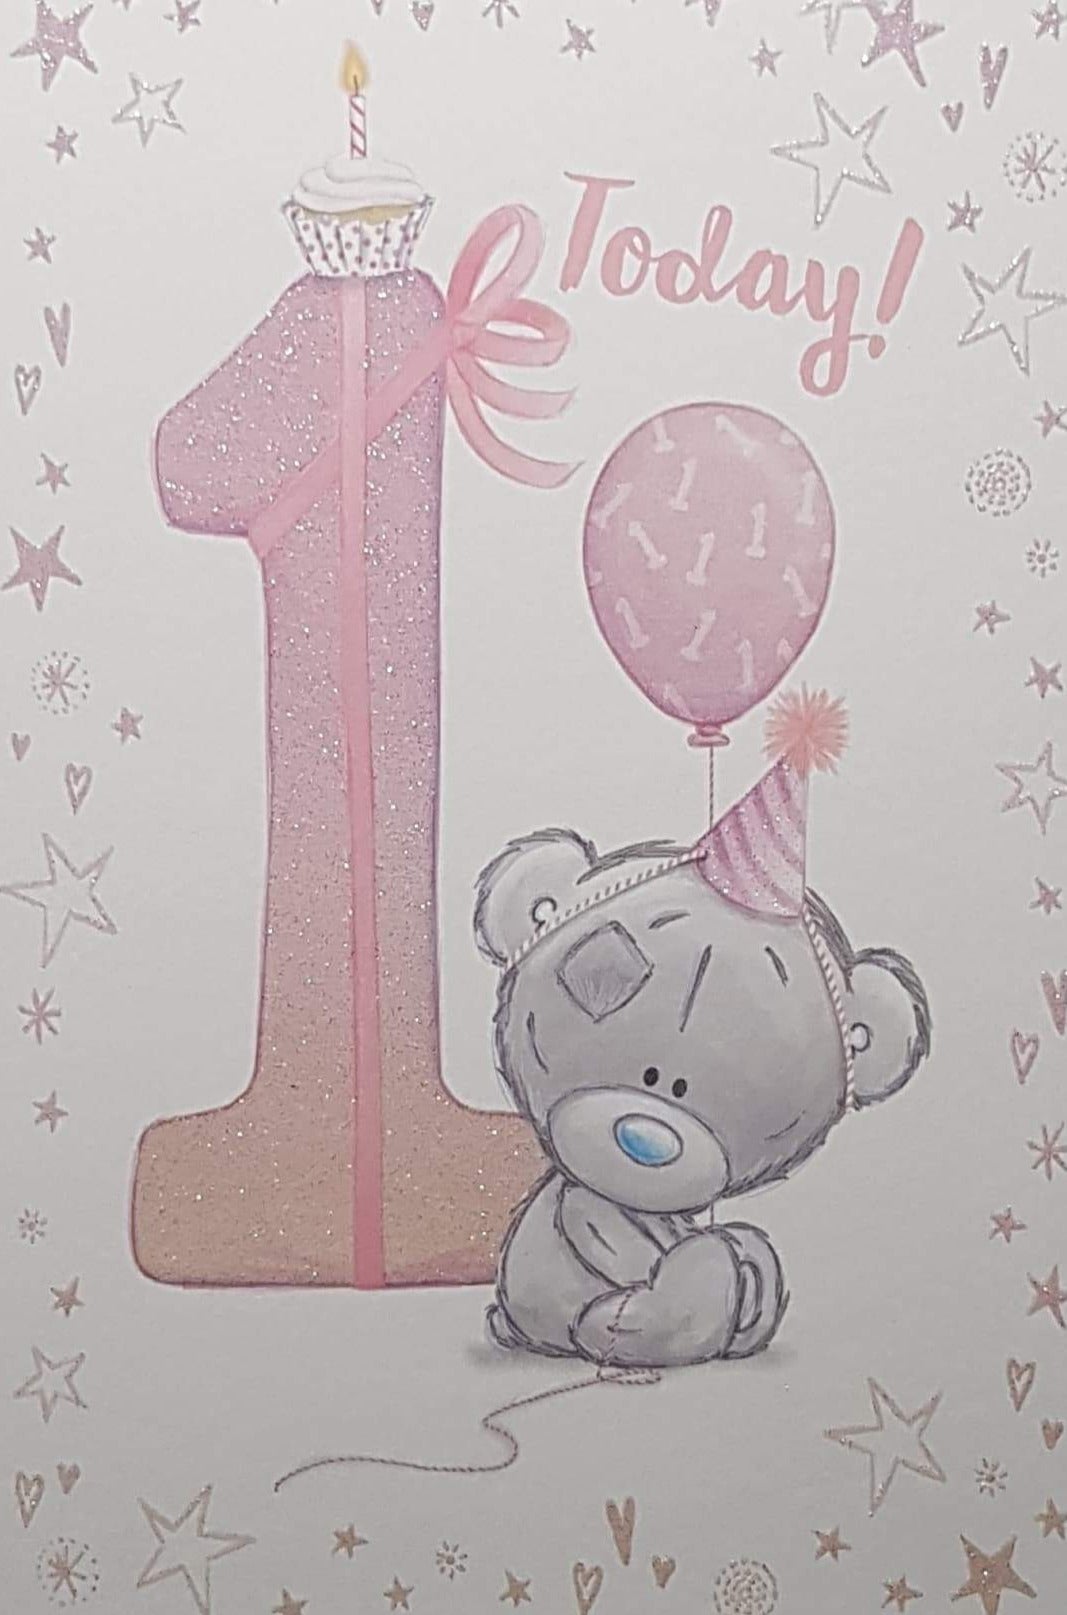 Age 1 Birthday Card - Girl / A Birthday Cup Cake On A Large Pink Number 1